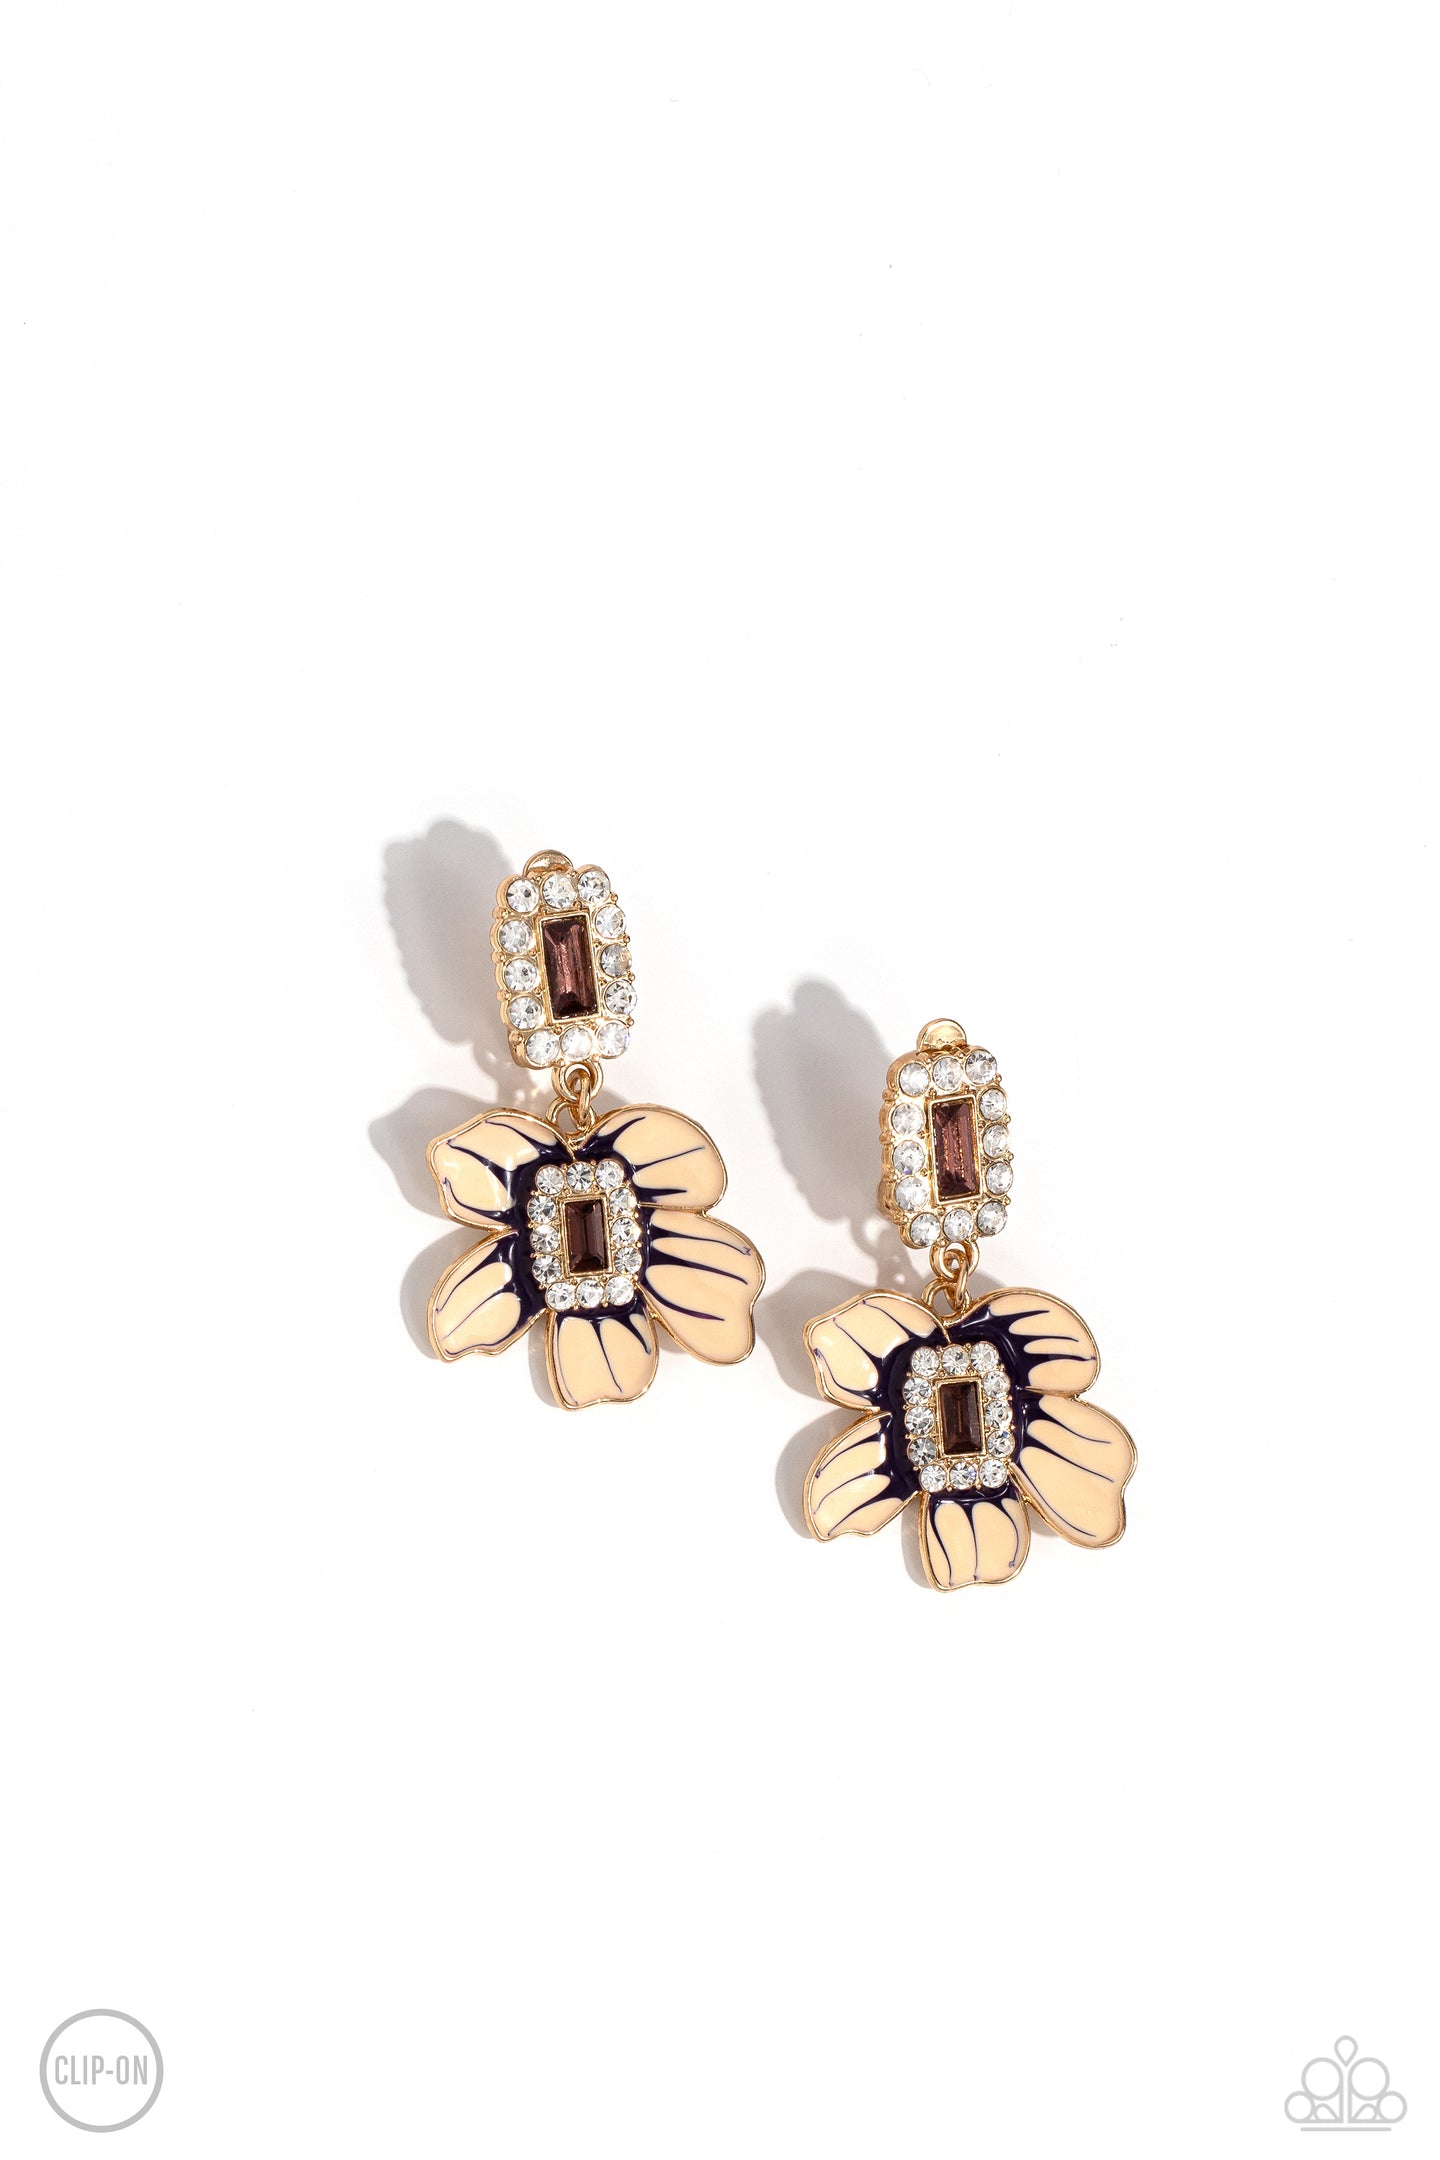 Colorful Clippings - Gold clip-on earring E010